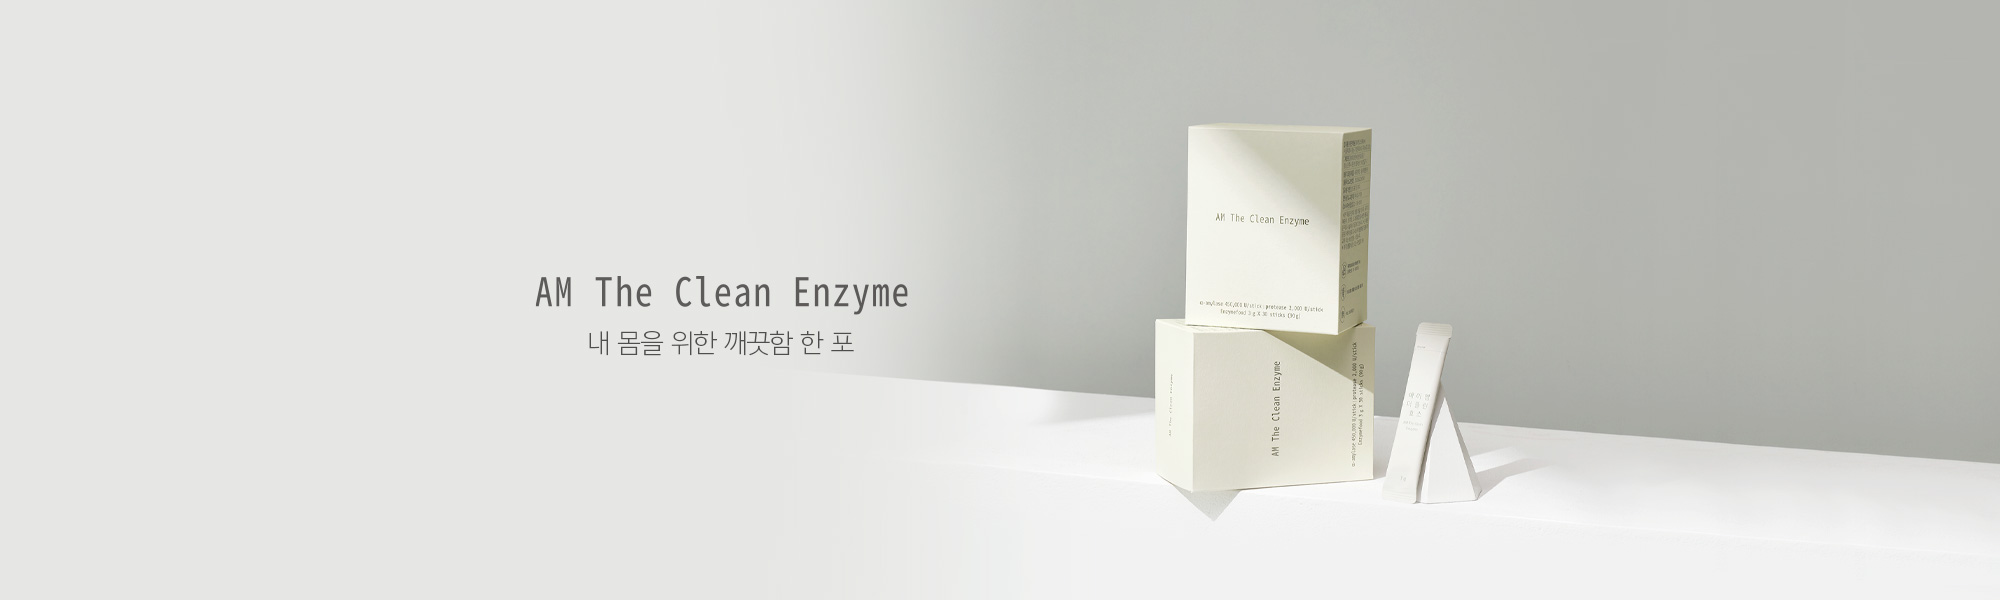 AM THE CLEAN ENZYME